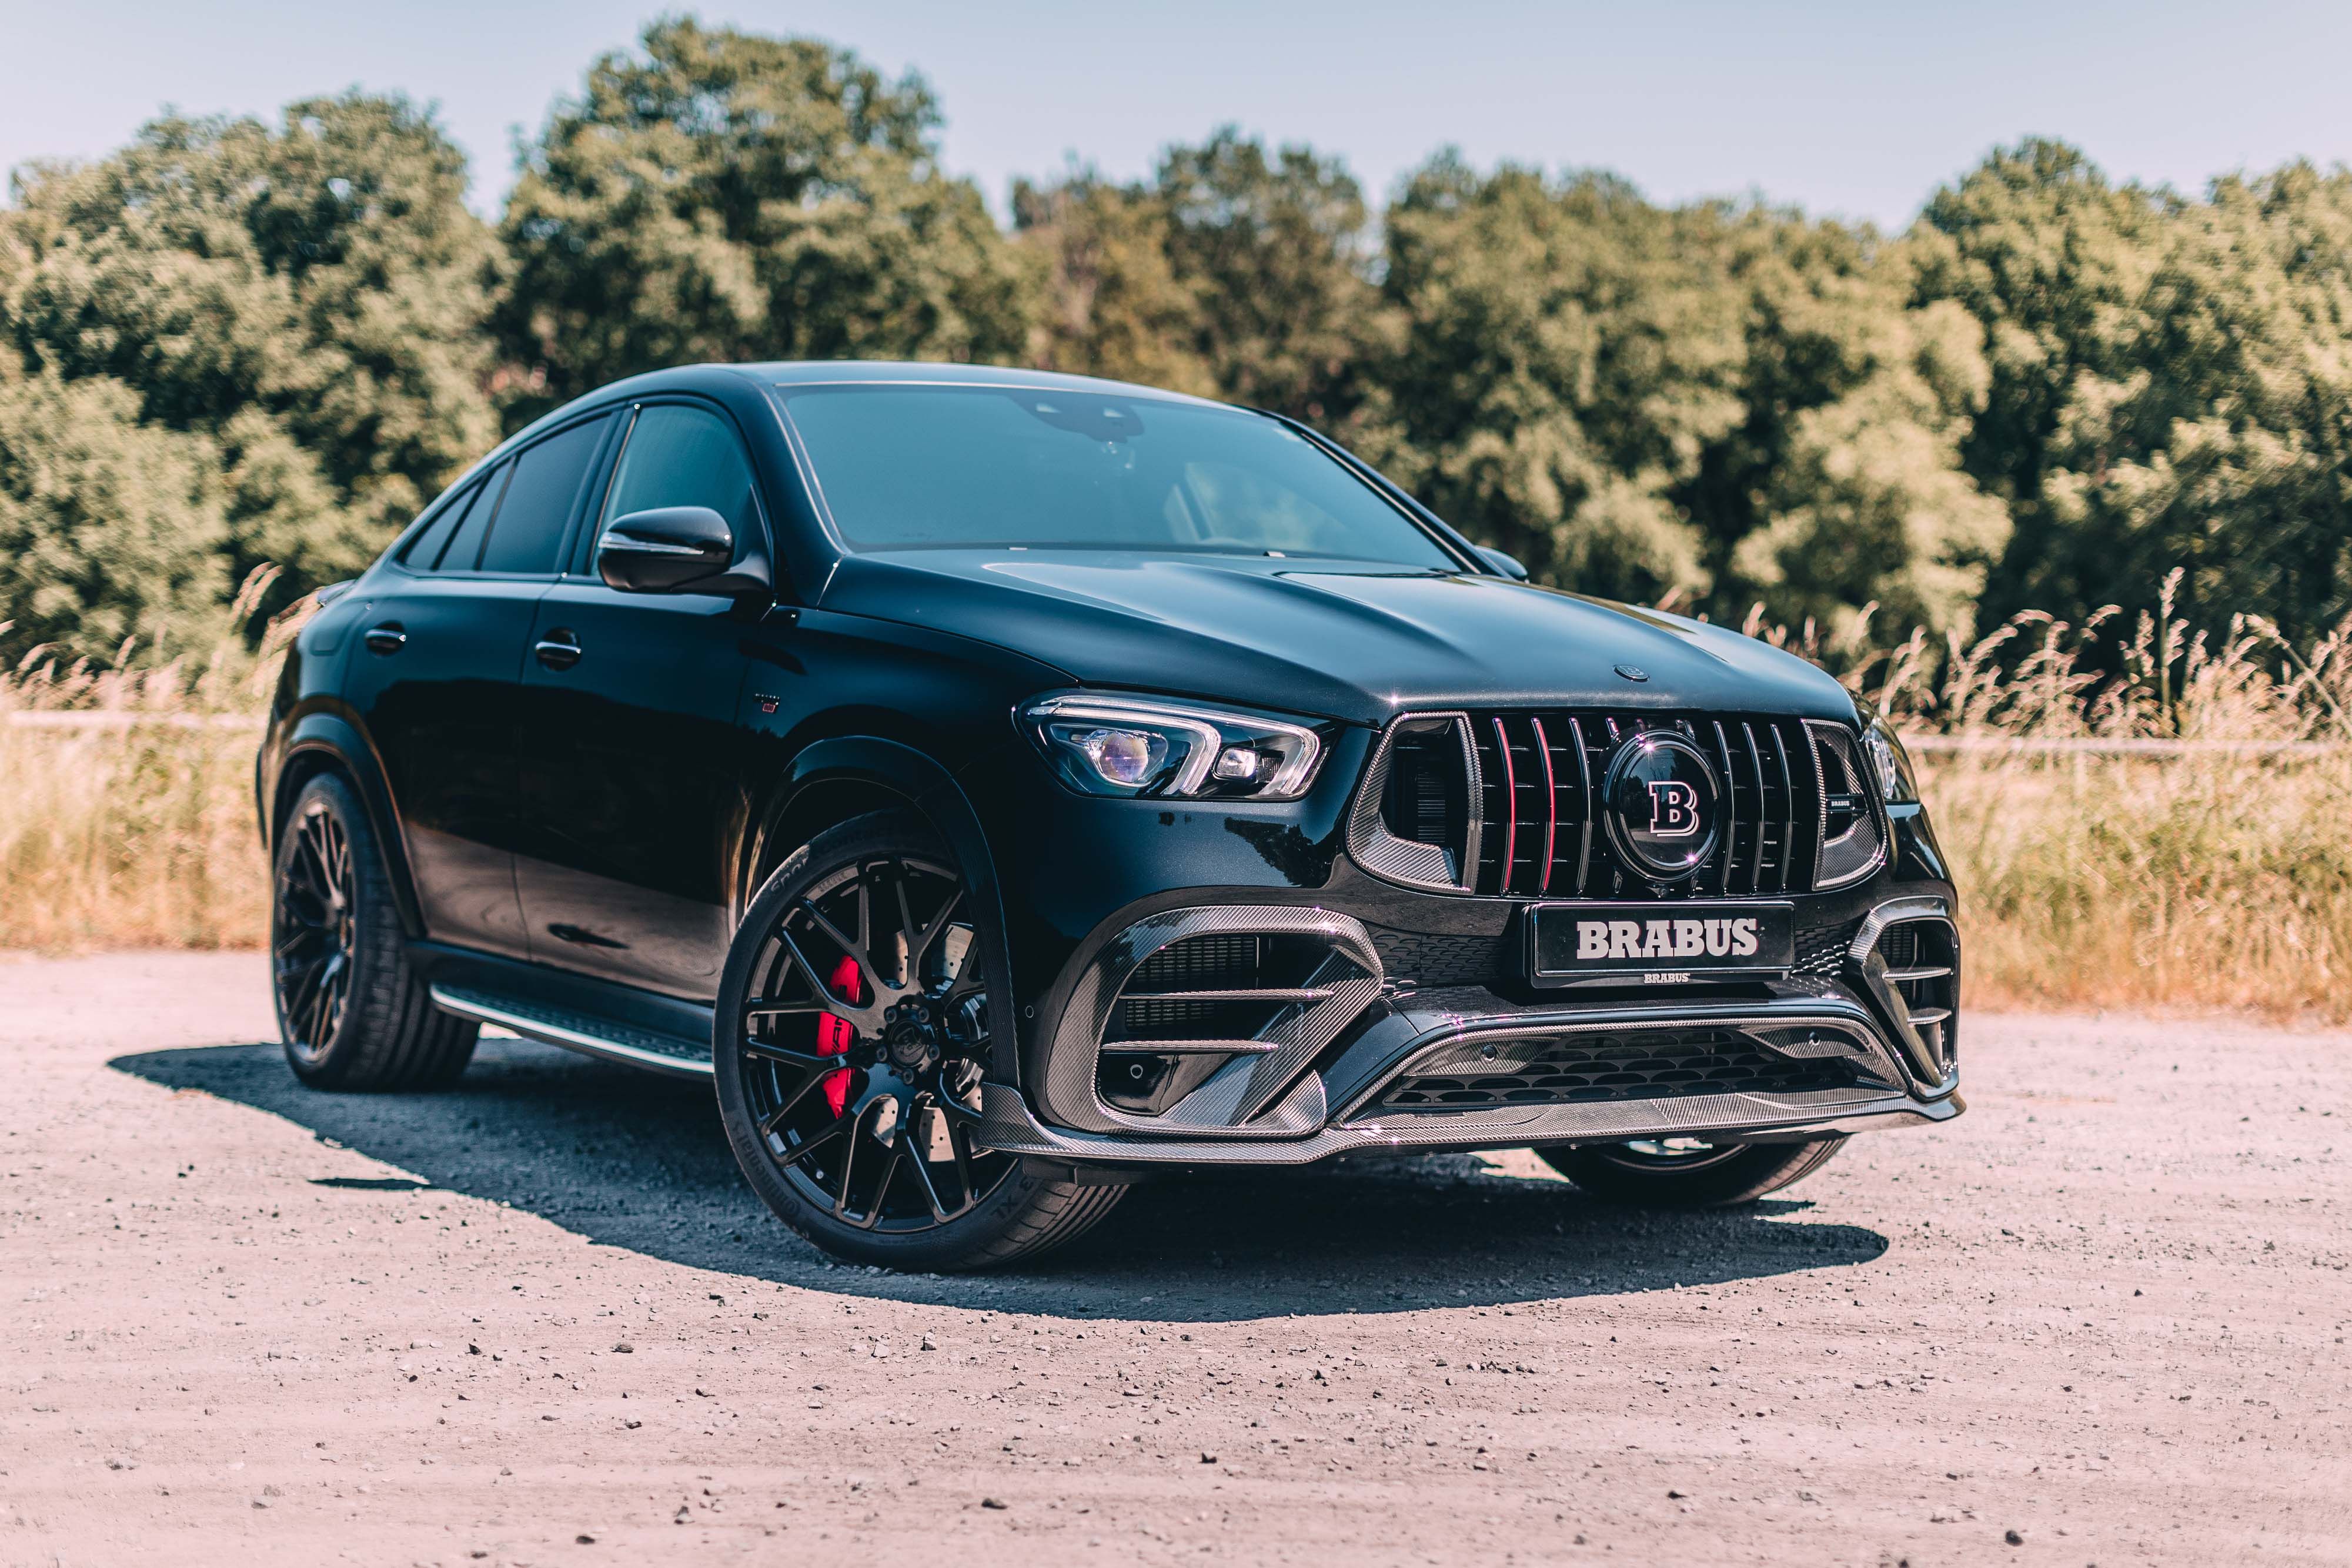 2021 Brabus 800 - The Mercedes-AMG GLE 63 S Receives The Brabus Treatment